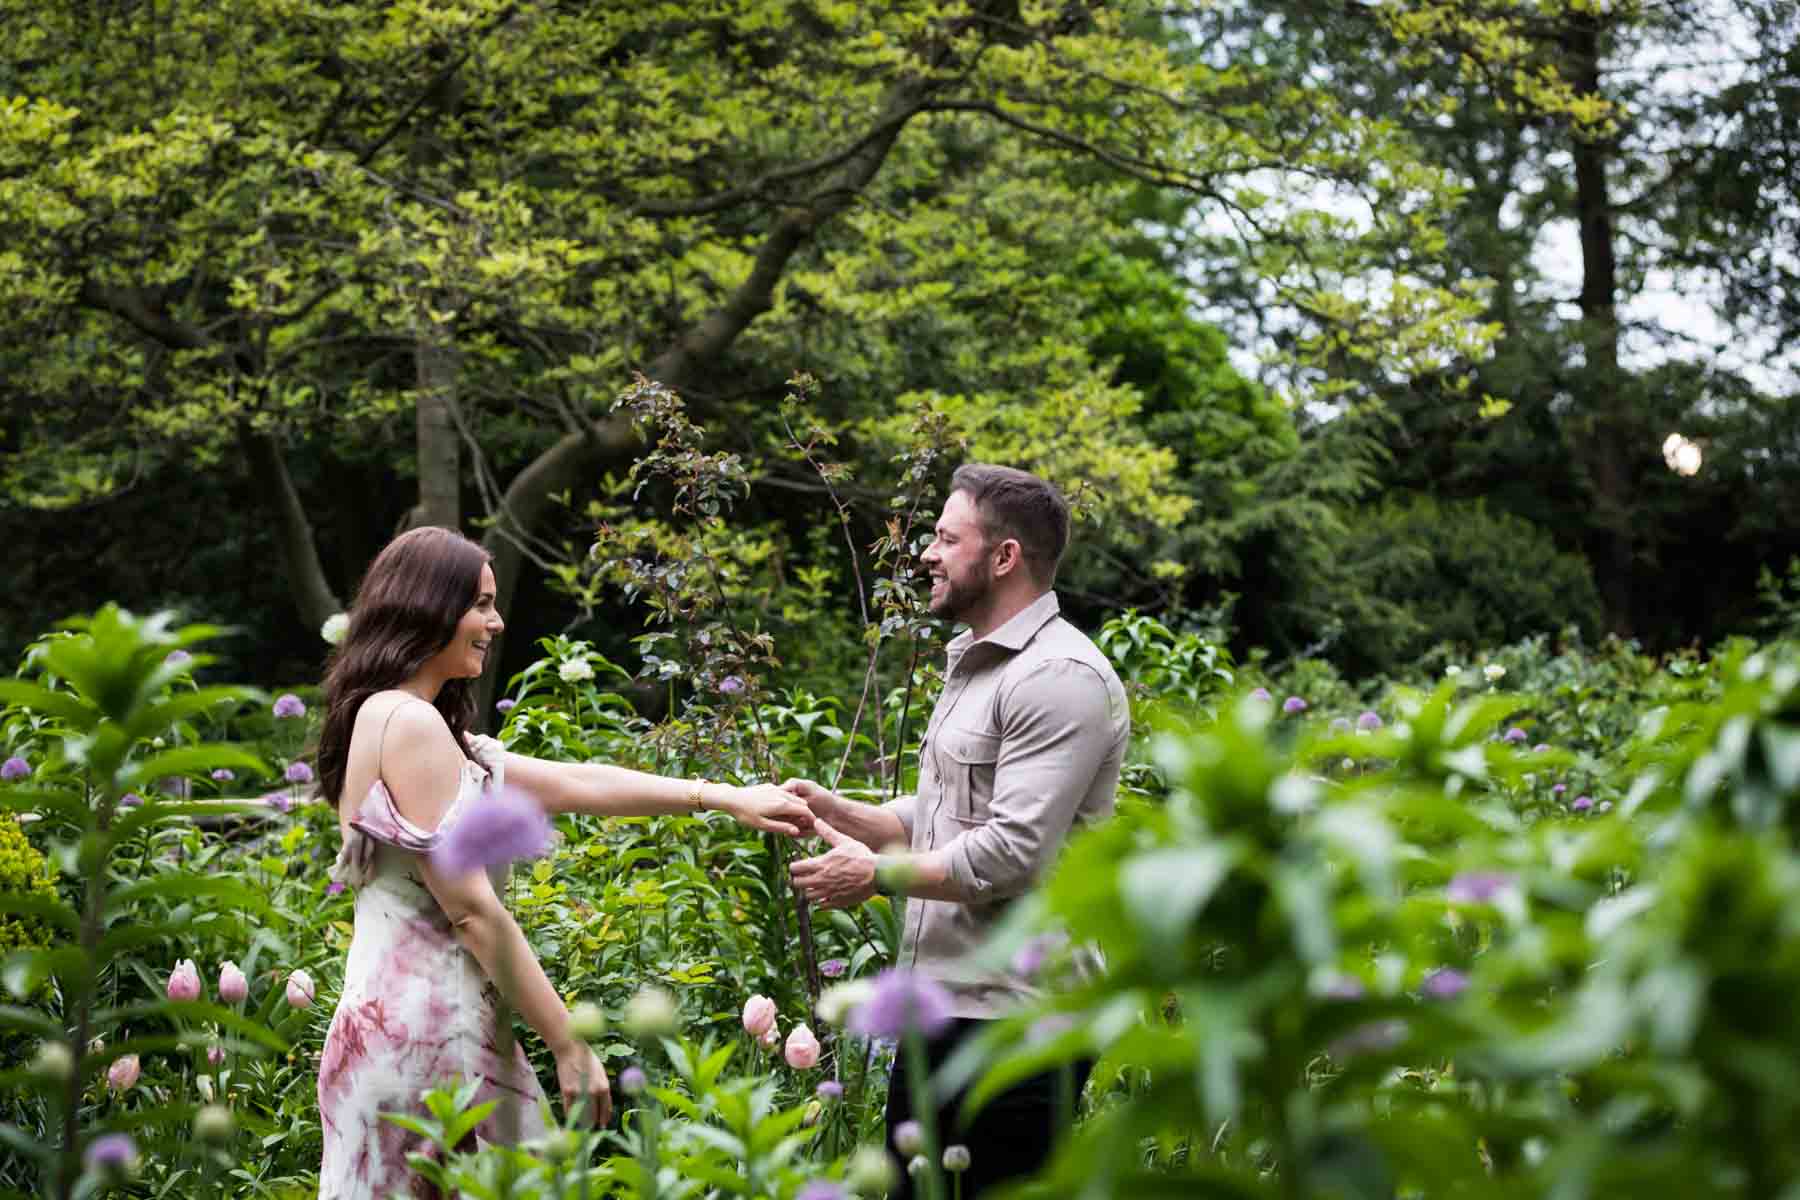 Couple dancing in Shakespeare Garden for an article on the best places to propose in Central Park